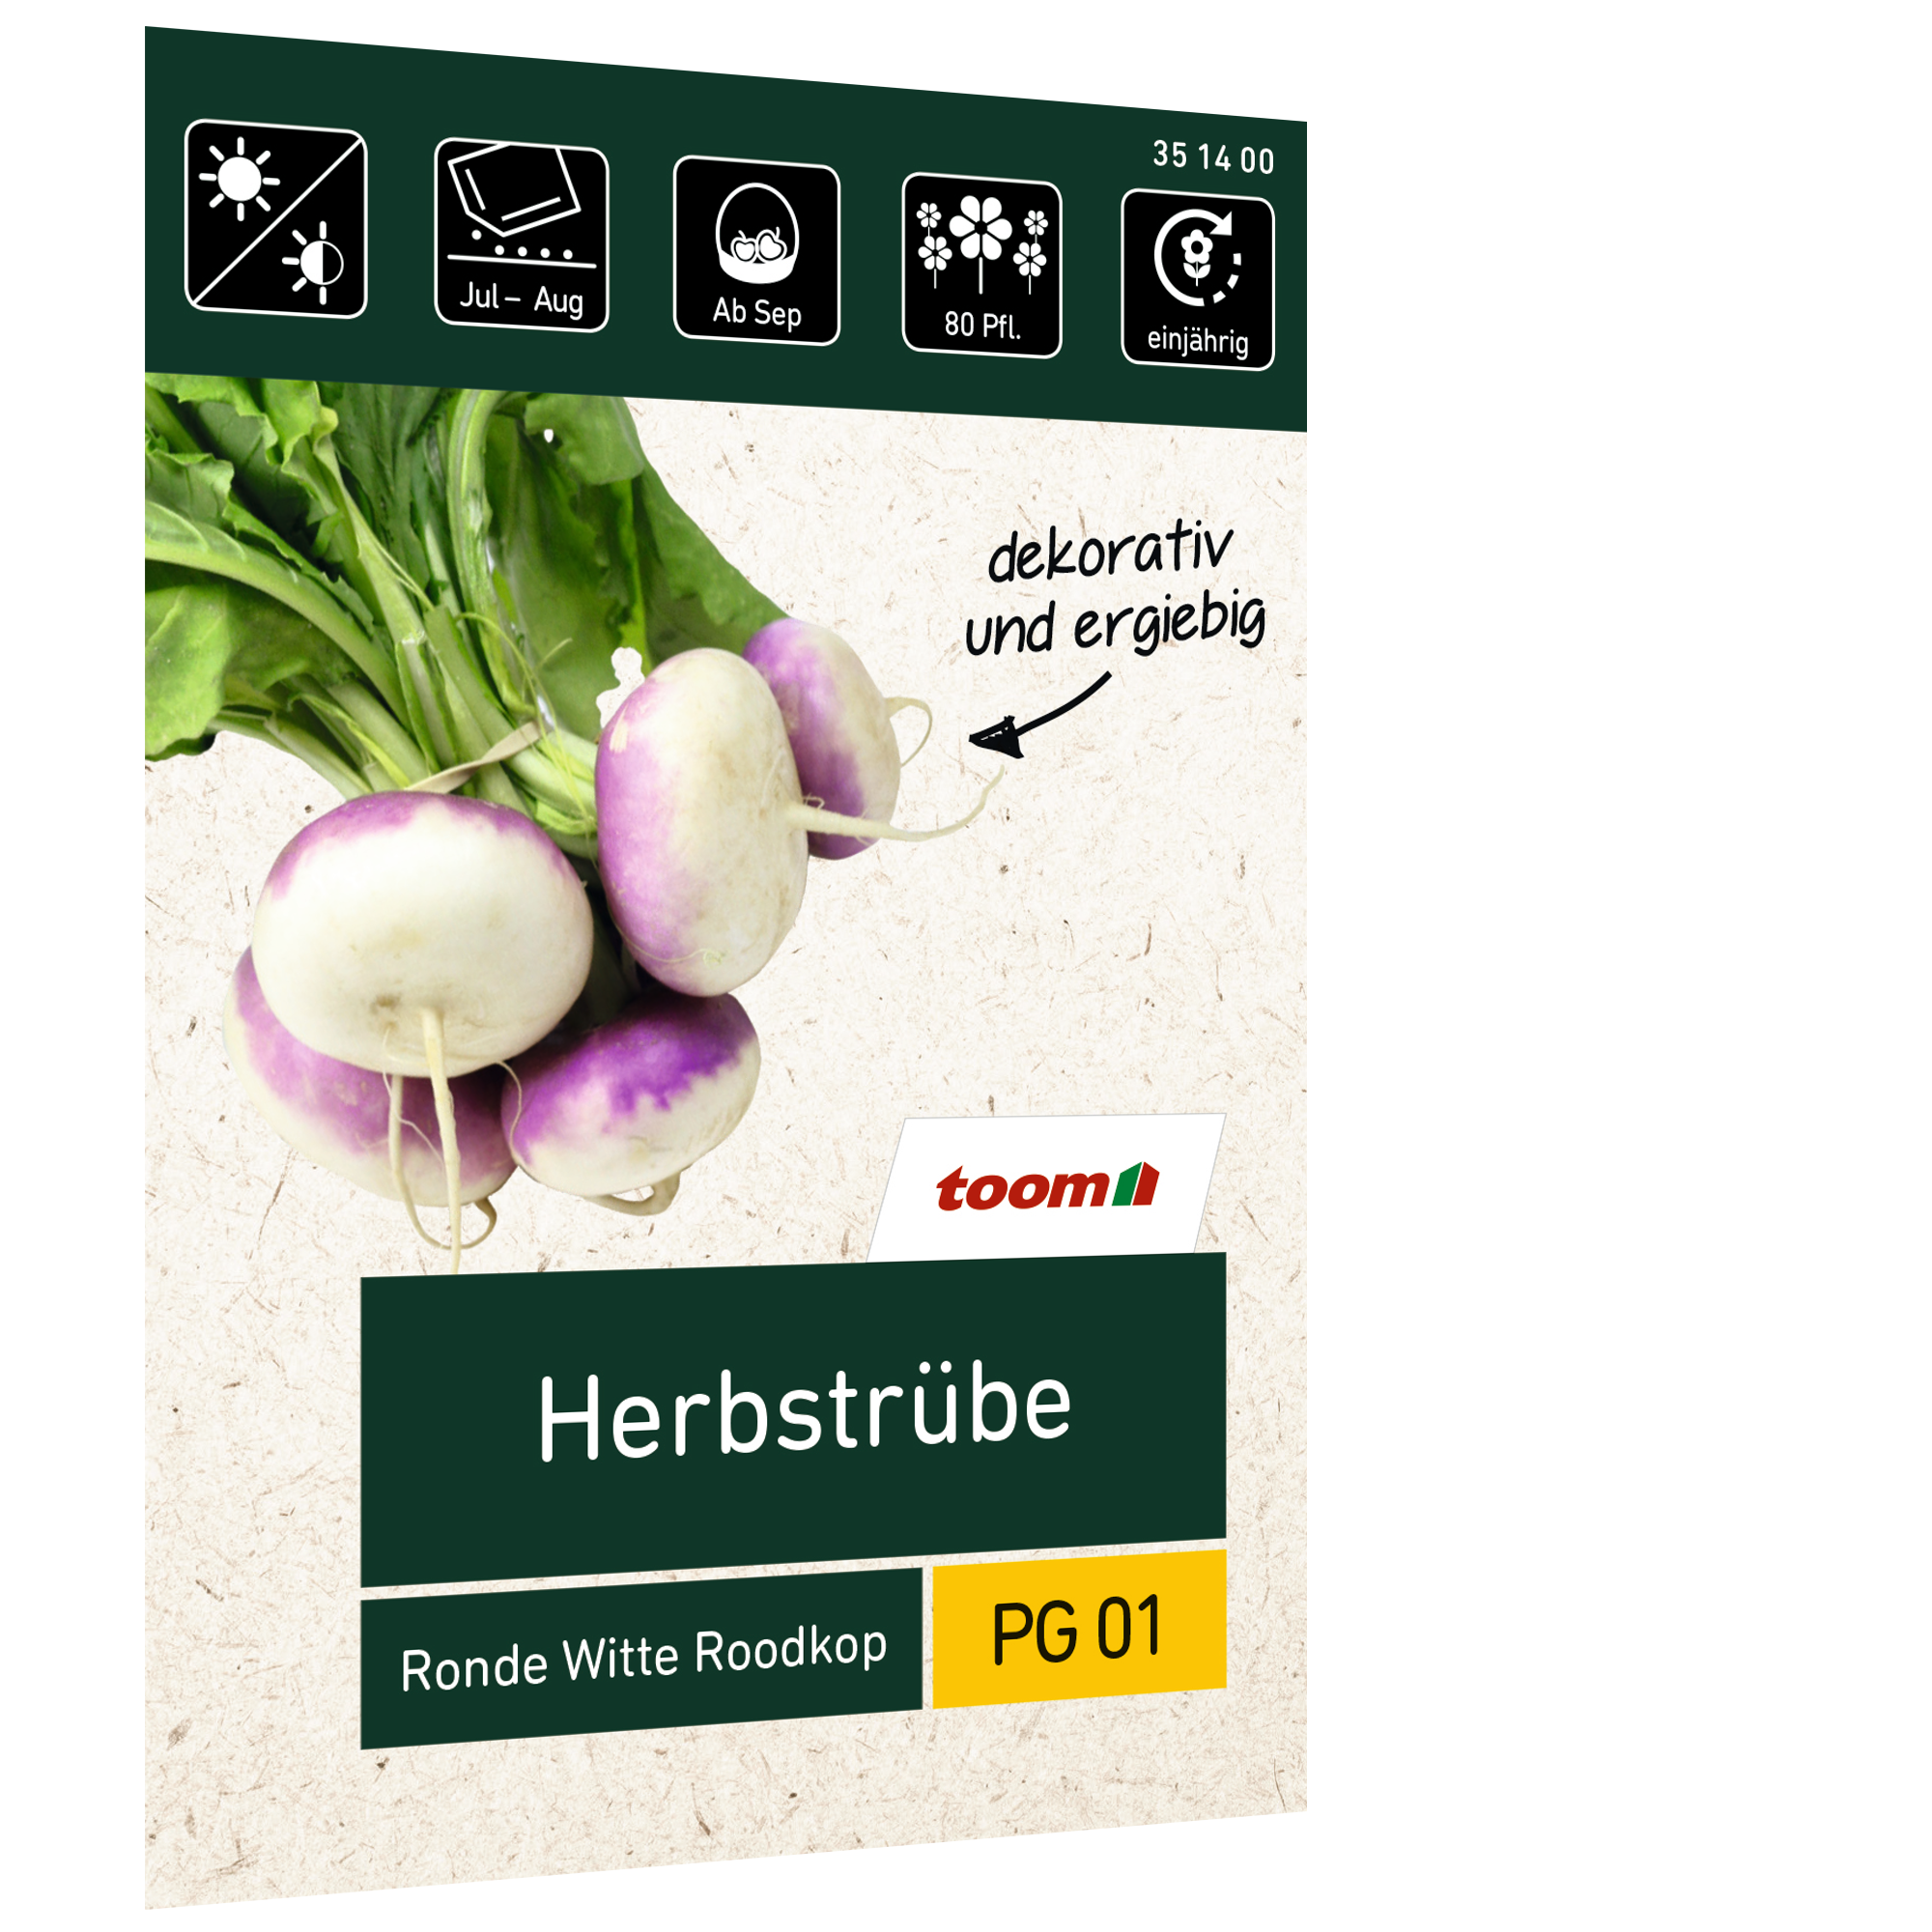 Herbstrübe 'Ronde Witte Roodkop' + product picture